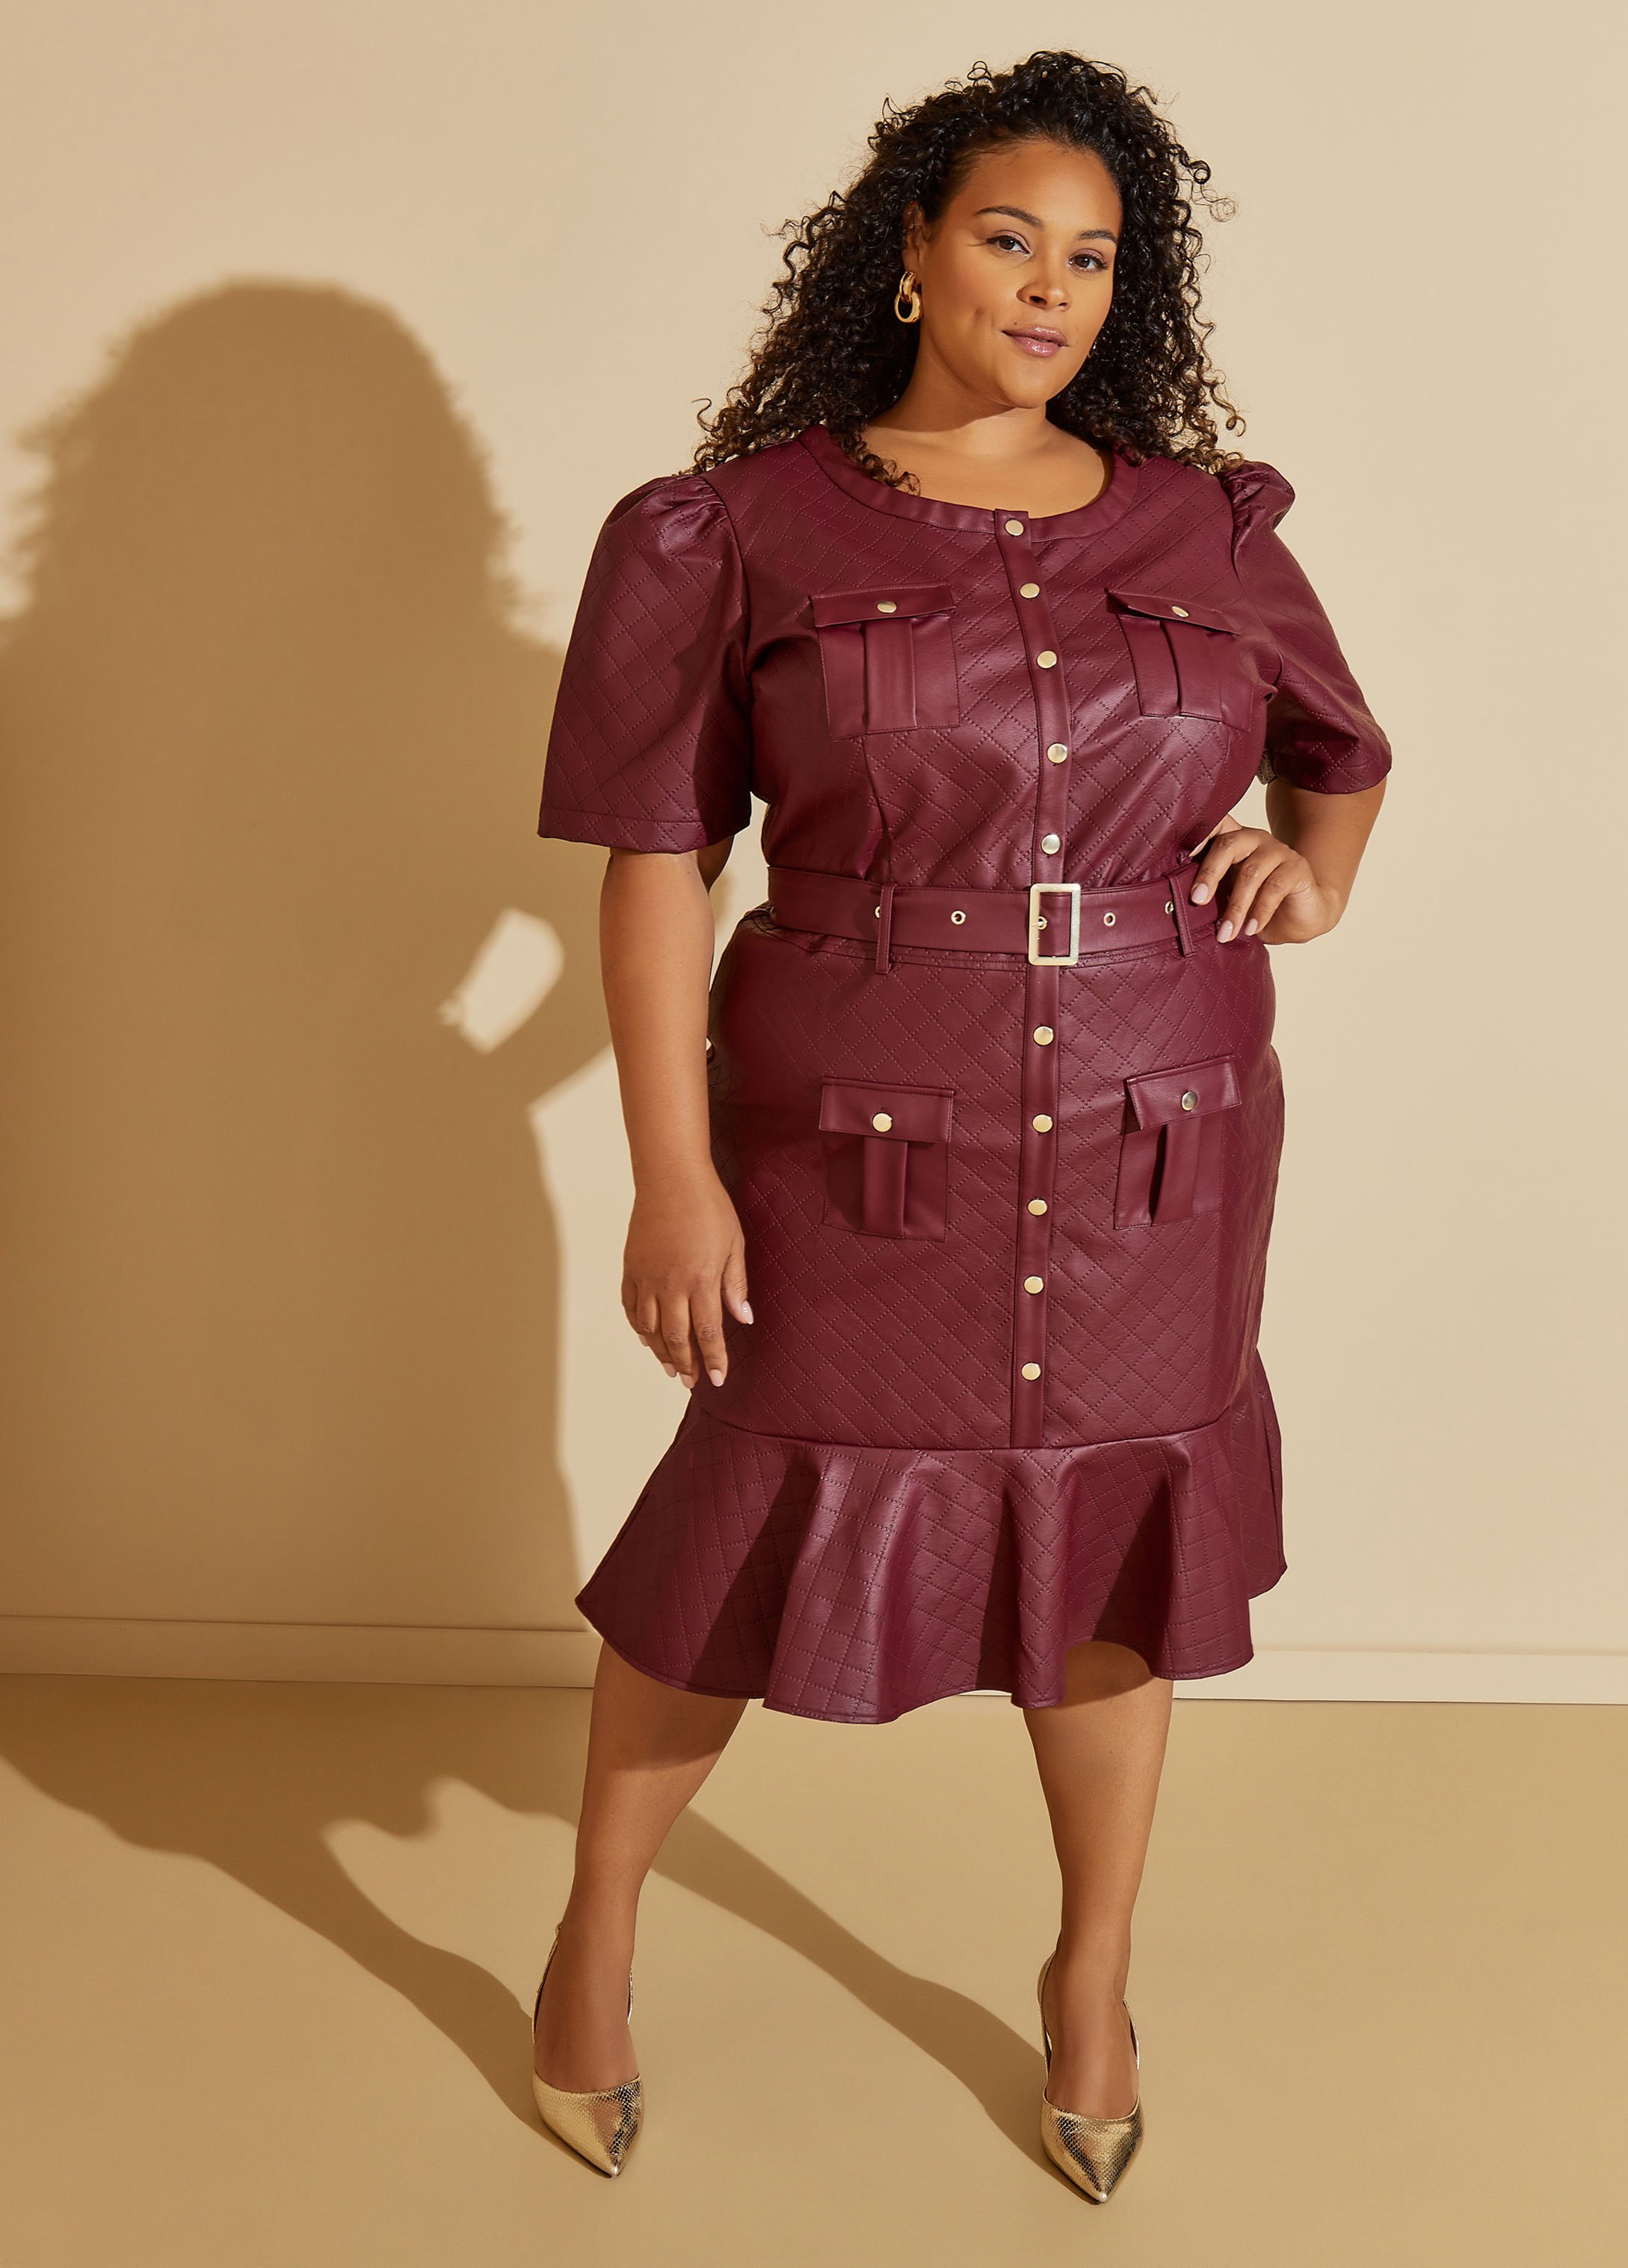 Plus Size Perforated Faux Leather Dress, RED, 26/28 - Ashley Stewart